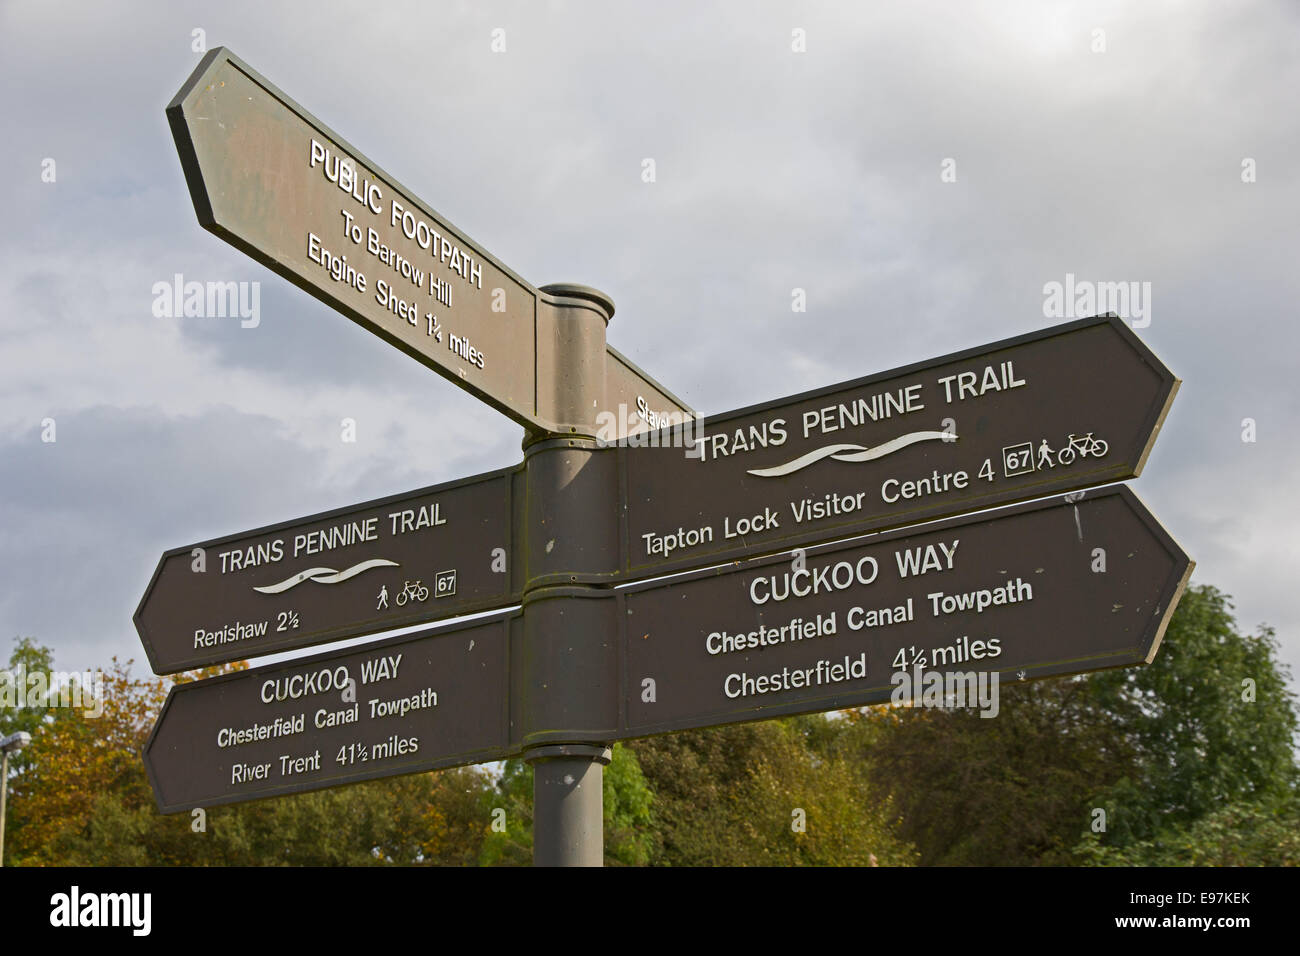 Signpost on Trans Pennine Trail and Cuckoo Way. Stock Photo